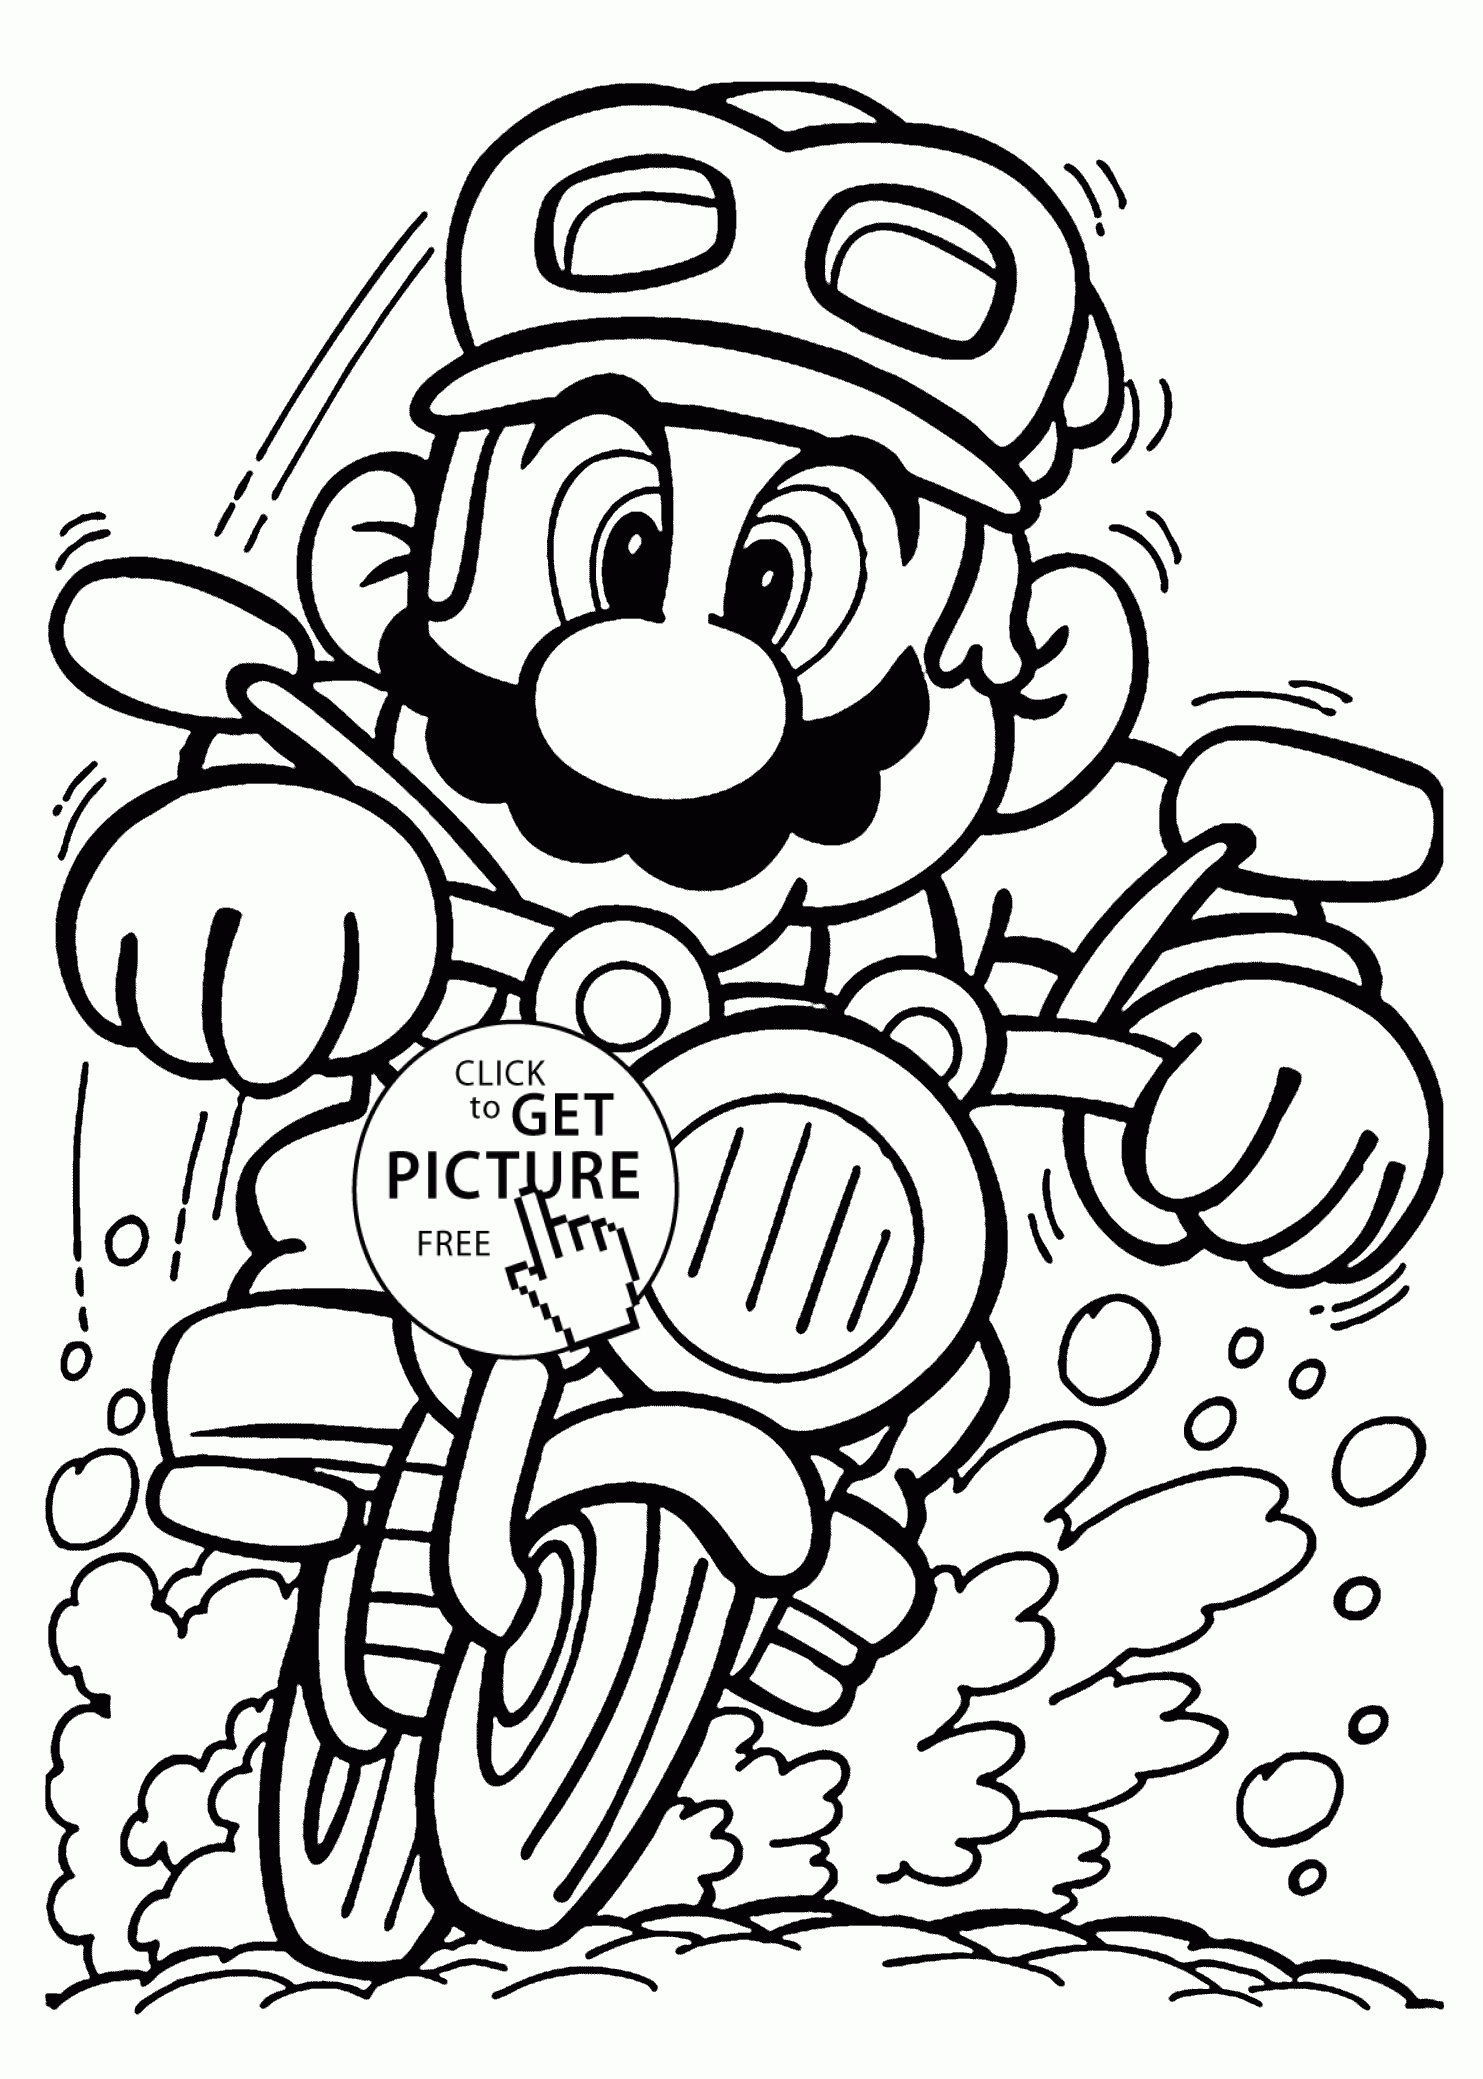 Mario On Motorcycle Coloring Pages For Kids Printable Free - Mario Coloring Pages Free Printable